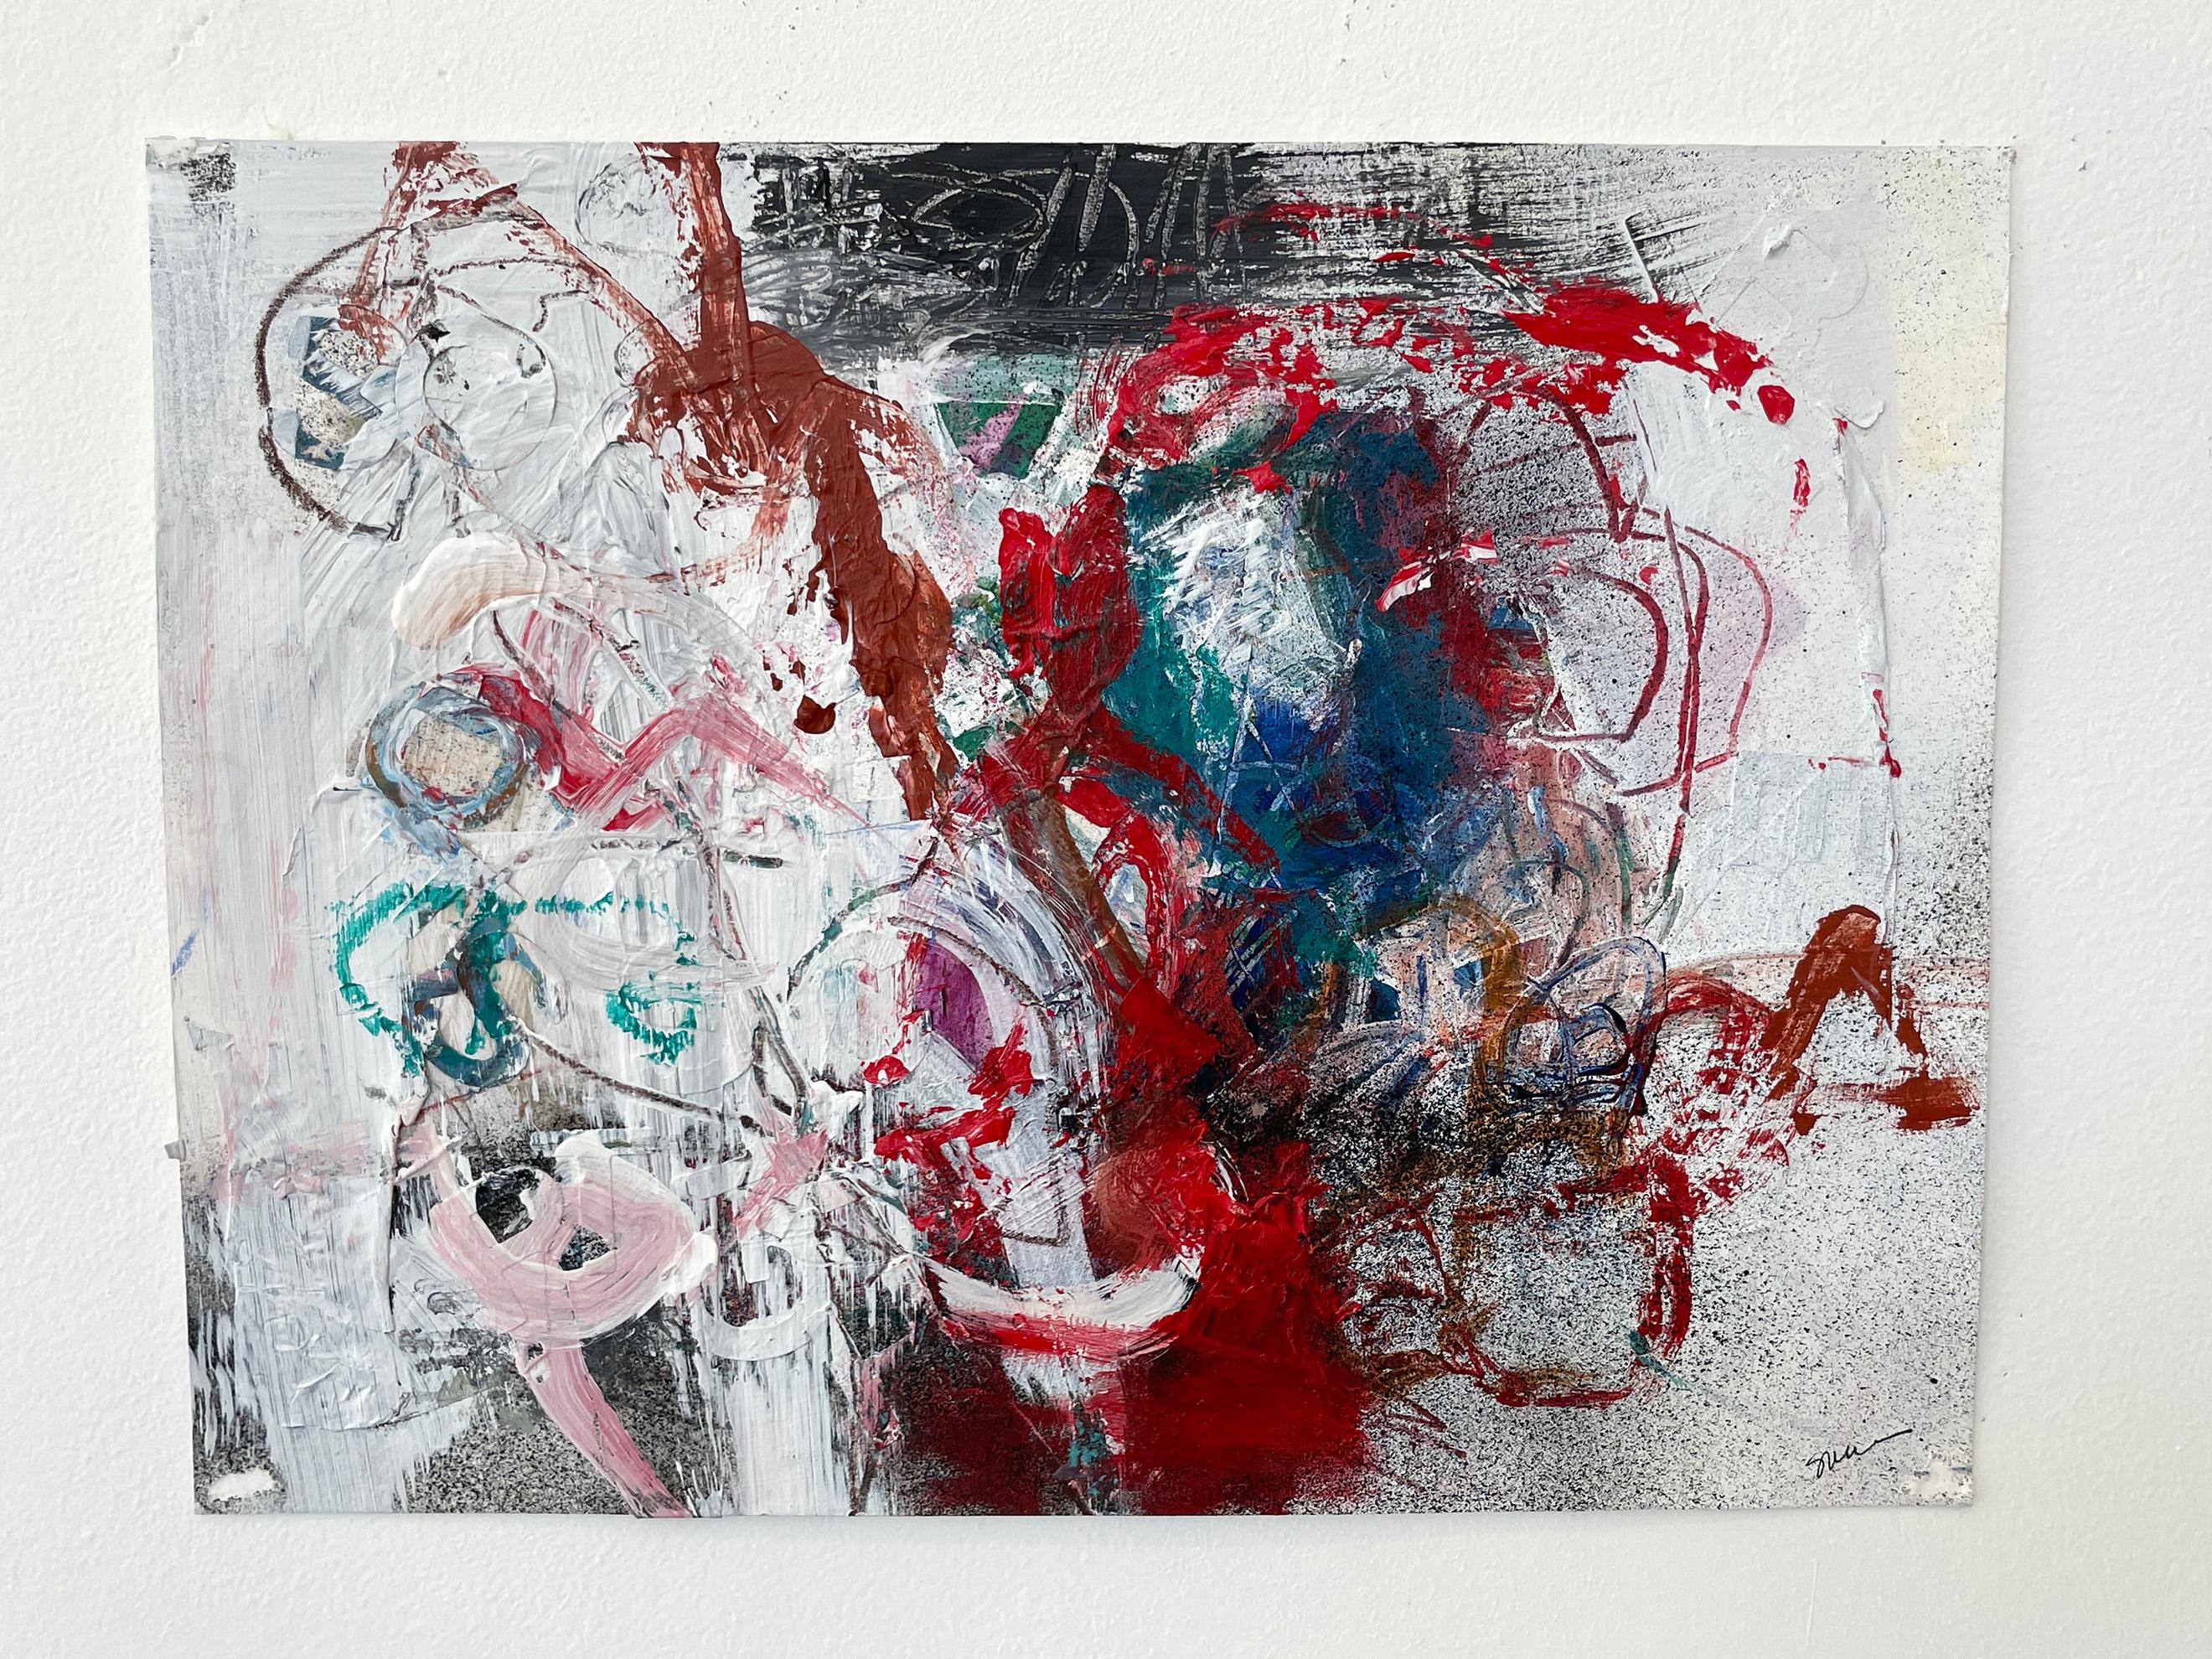 Small Works on Paper, Untitled #16 - Abstract Painting by Stephanie Visser 